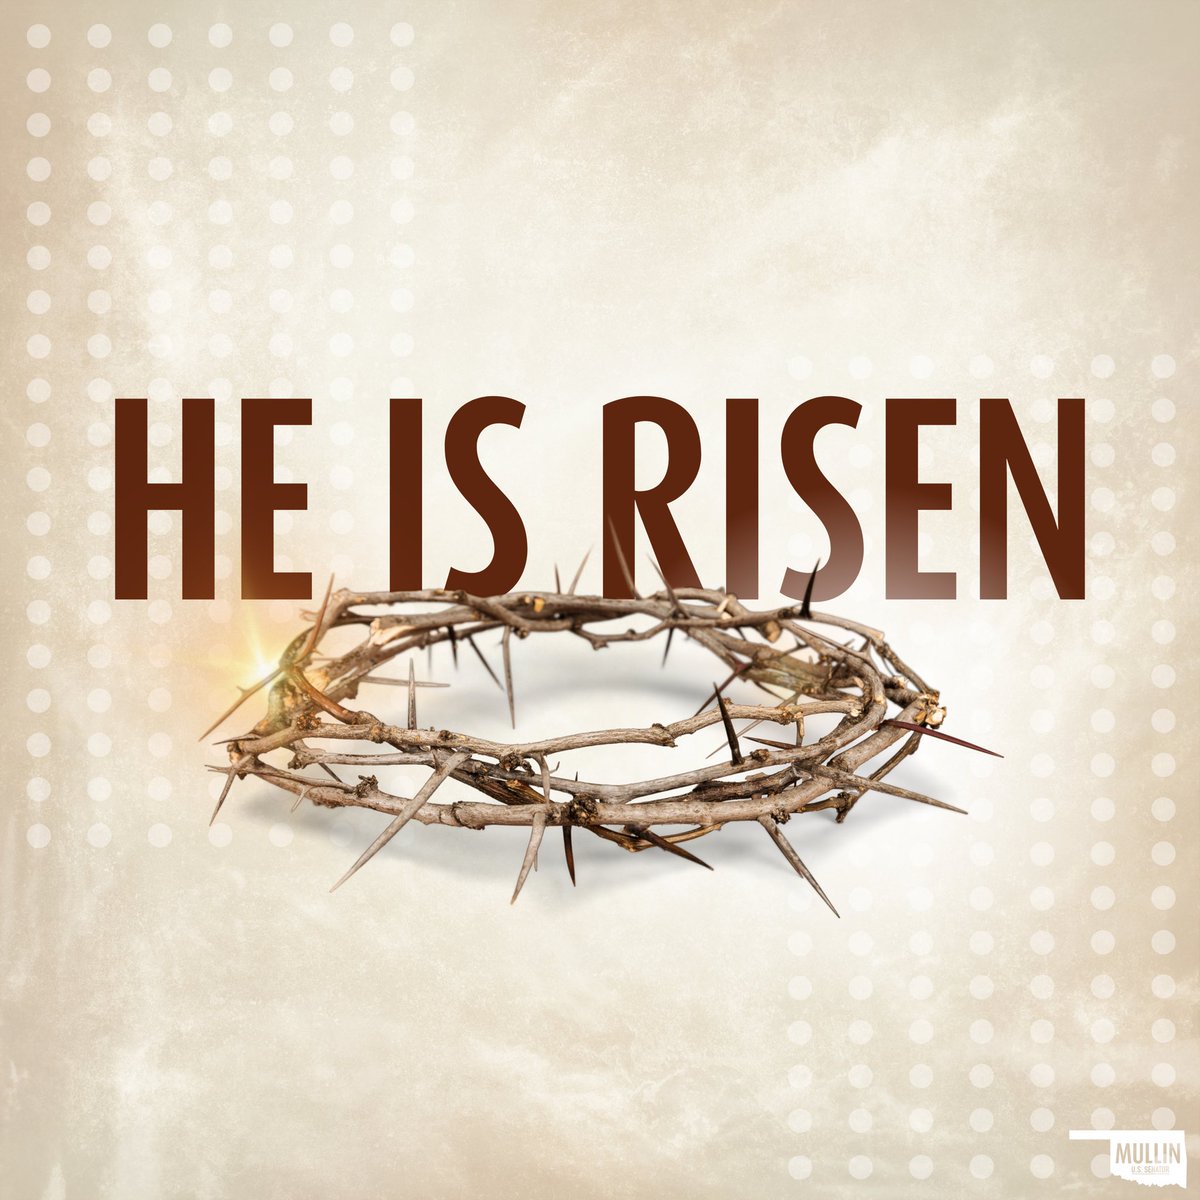 “’Don’t be alarmed,’ he said. ‘You are looking for Jesus the Nazarene, who was crucified. He has risen!’” (Mark 16:6). He is risen indeed! Wishing a happy Easter to all who celebrate. May God bless you and your family.